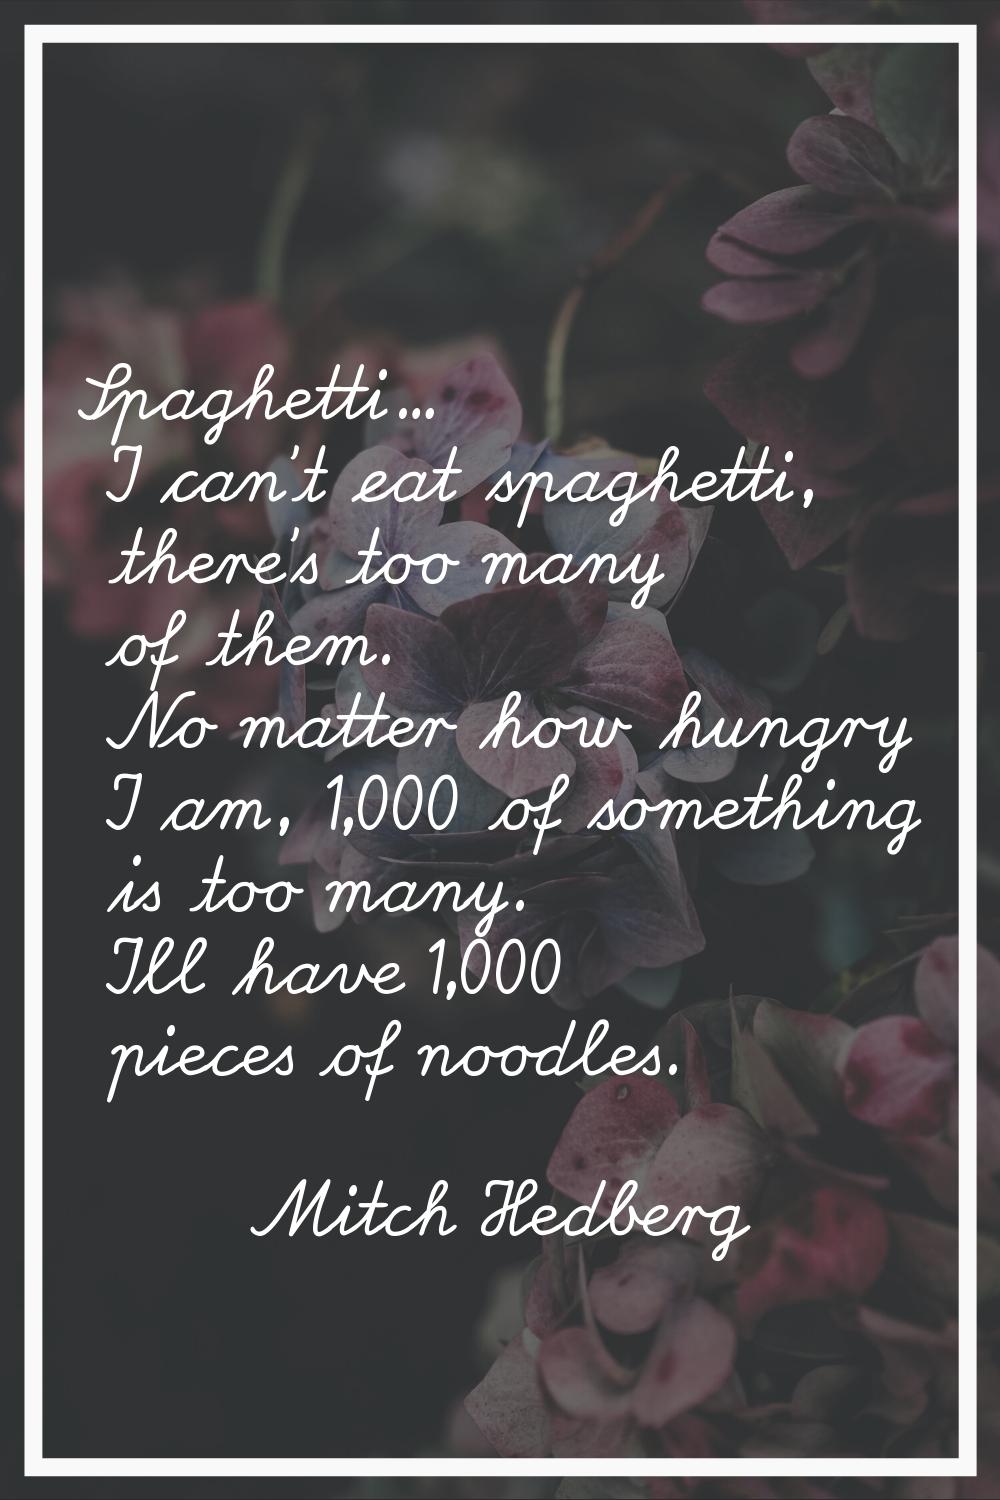 Spaghetti... I can't eat spaghetti, there's too many of them. No matter how hungry I am, 1,000 of s